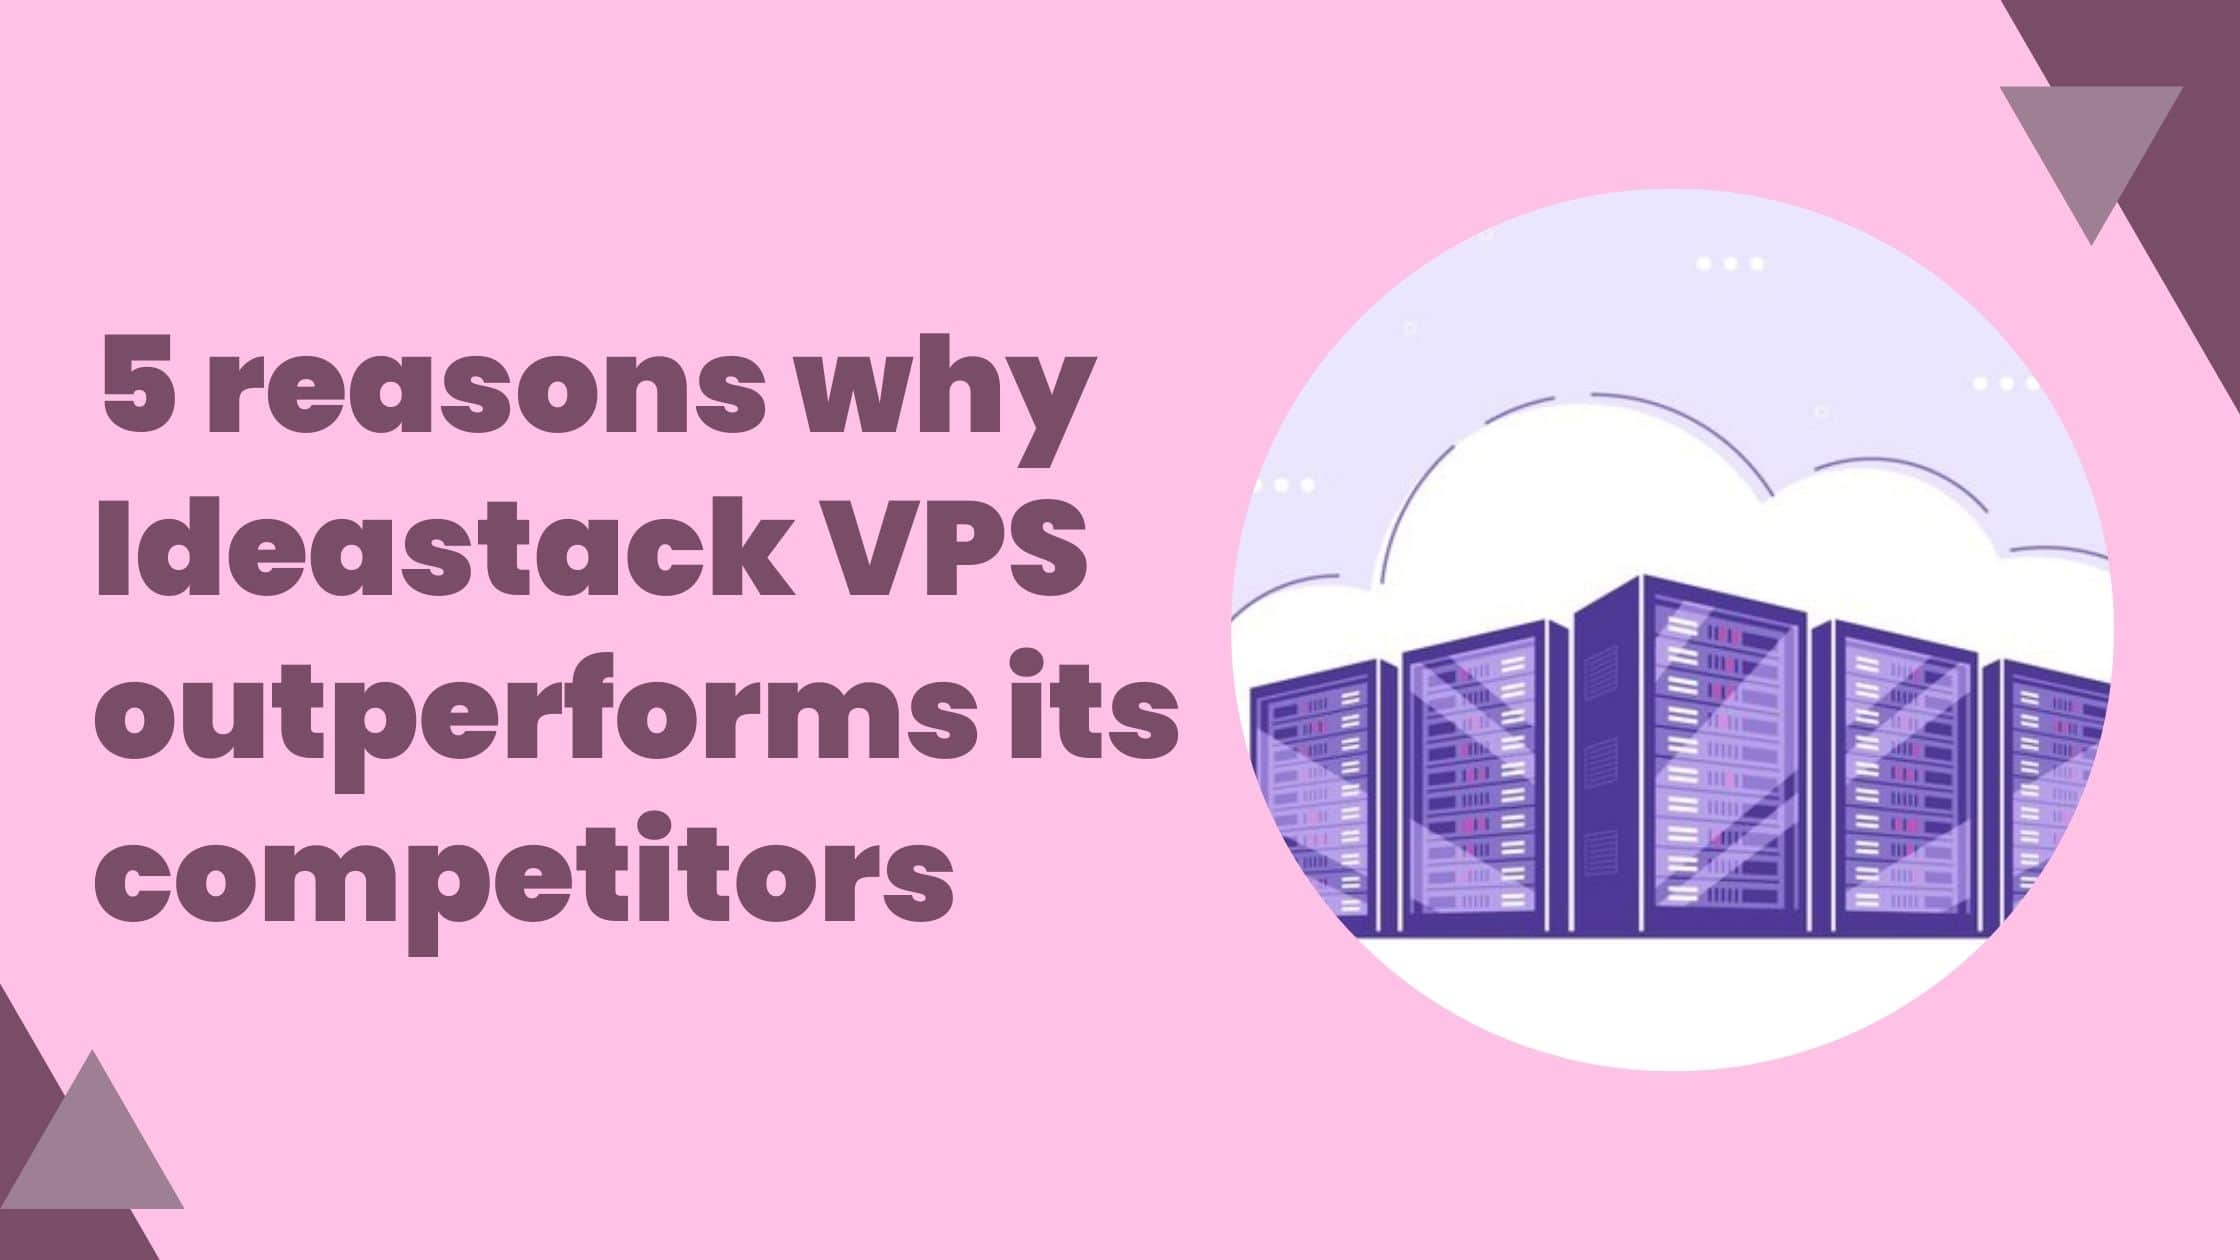 5 reasons why Ideastack VPS outperforms its competitors